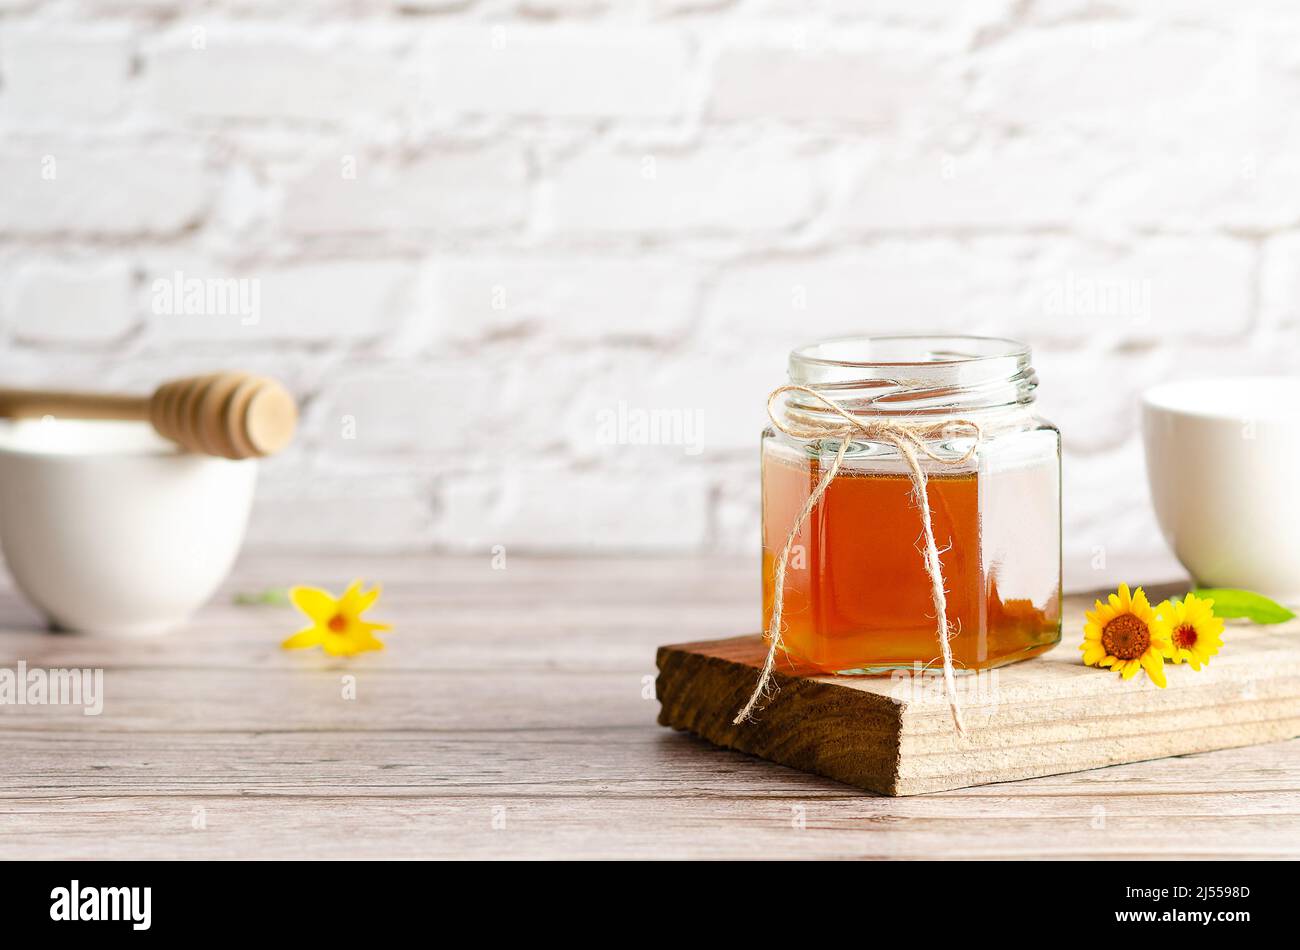 Honey in a jar on a piece of wood, a honey dipper, white bowls and some marigolds, on a wooden table and a white wall. Stock Photo